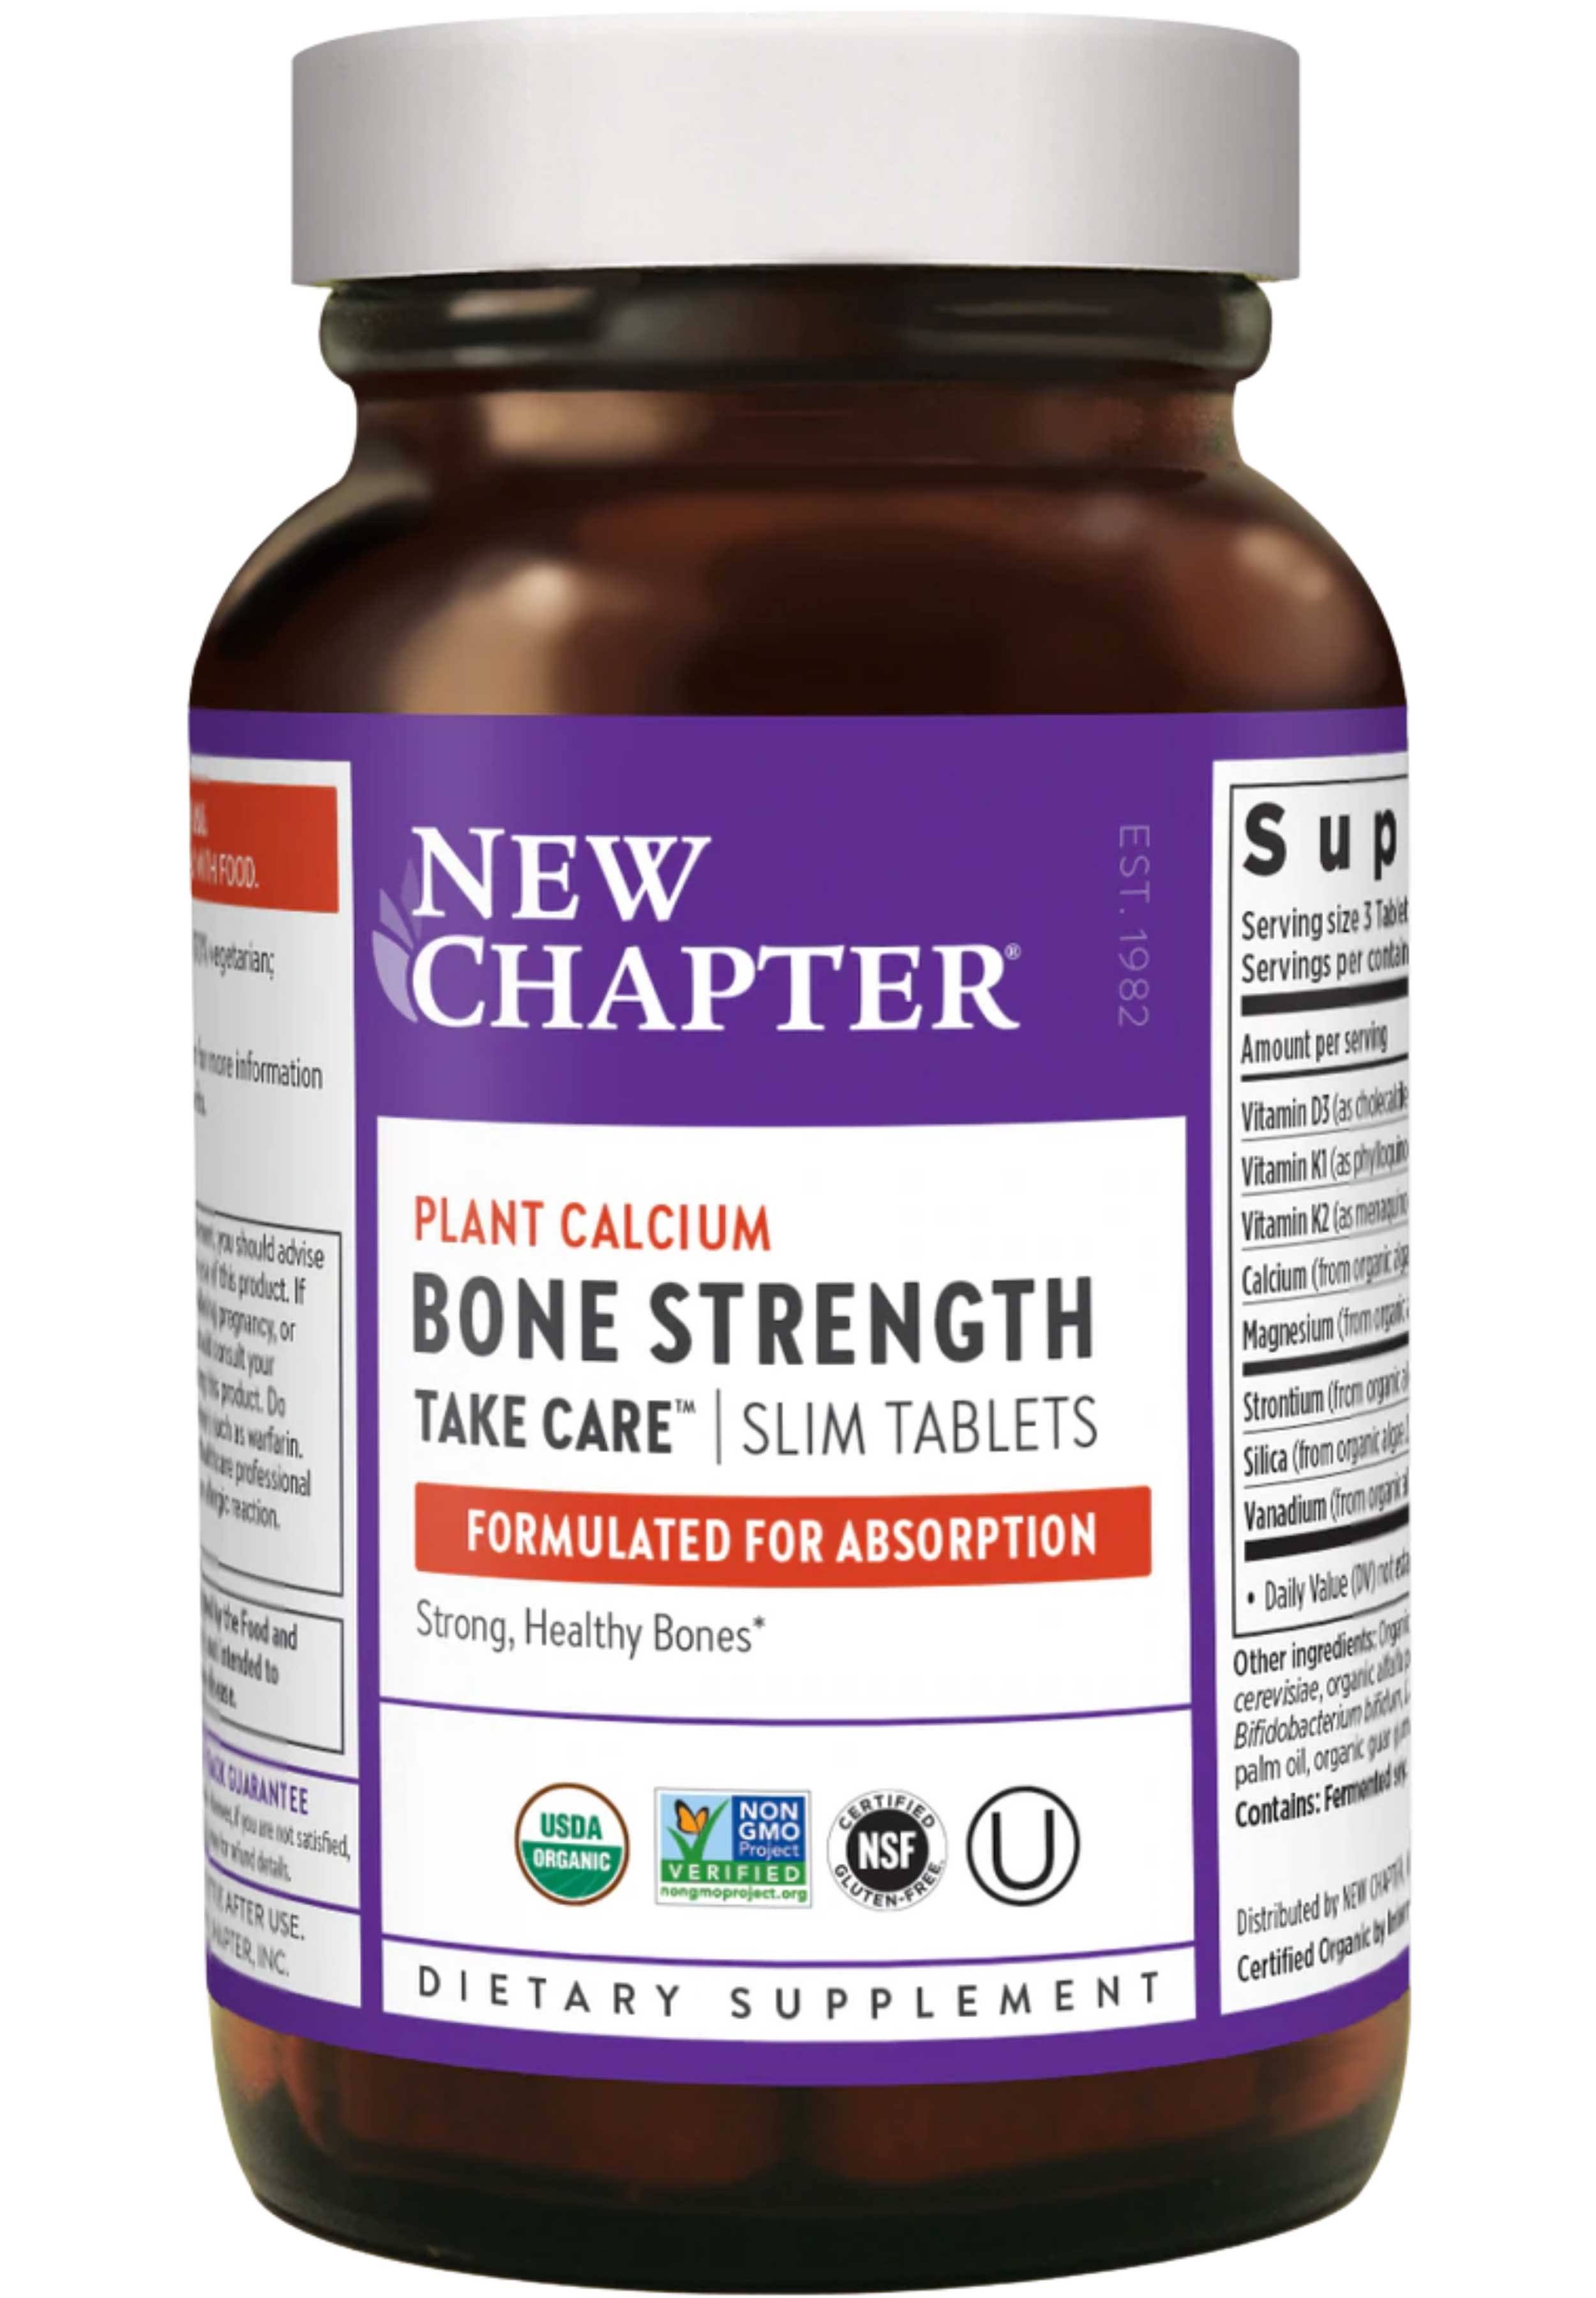 New Chapter Bone Strength Take Care Calcium - 30 Tablets